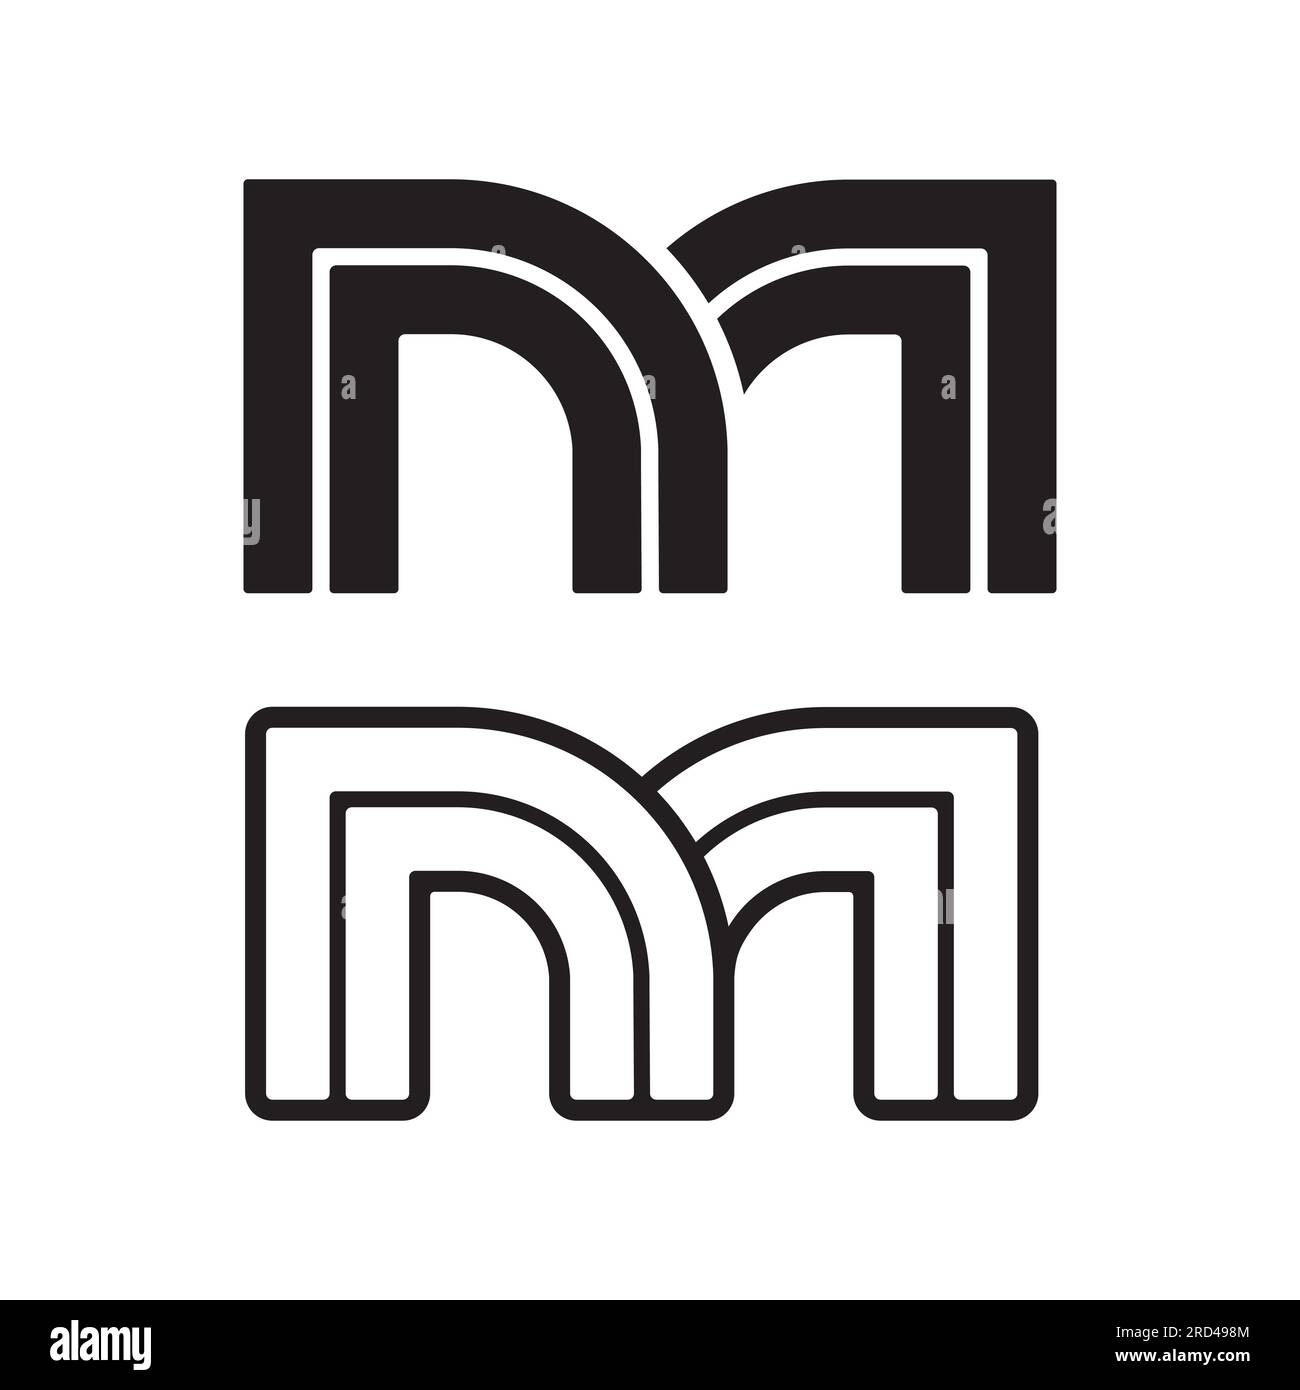 Simple Initial Letter m Logo. Usable for Business and Branding Logos. Flat Vector Logo Design Template Element Stock Vector